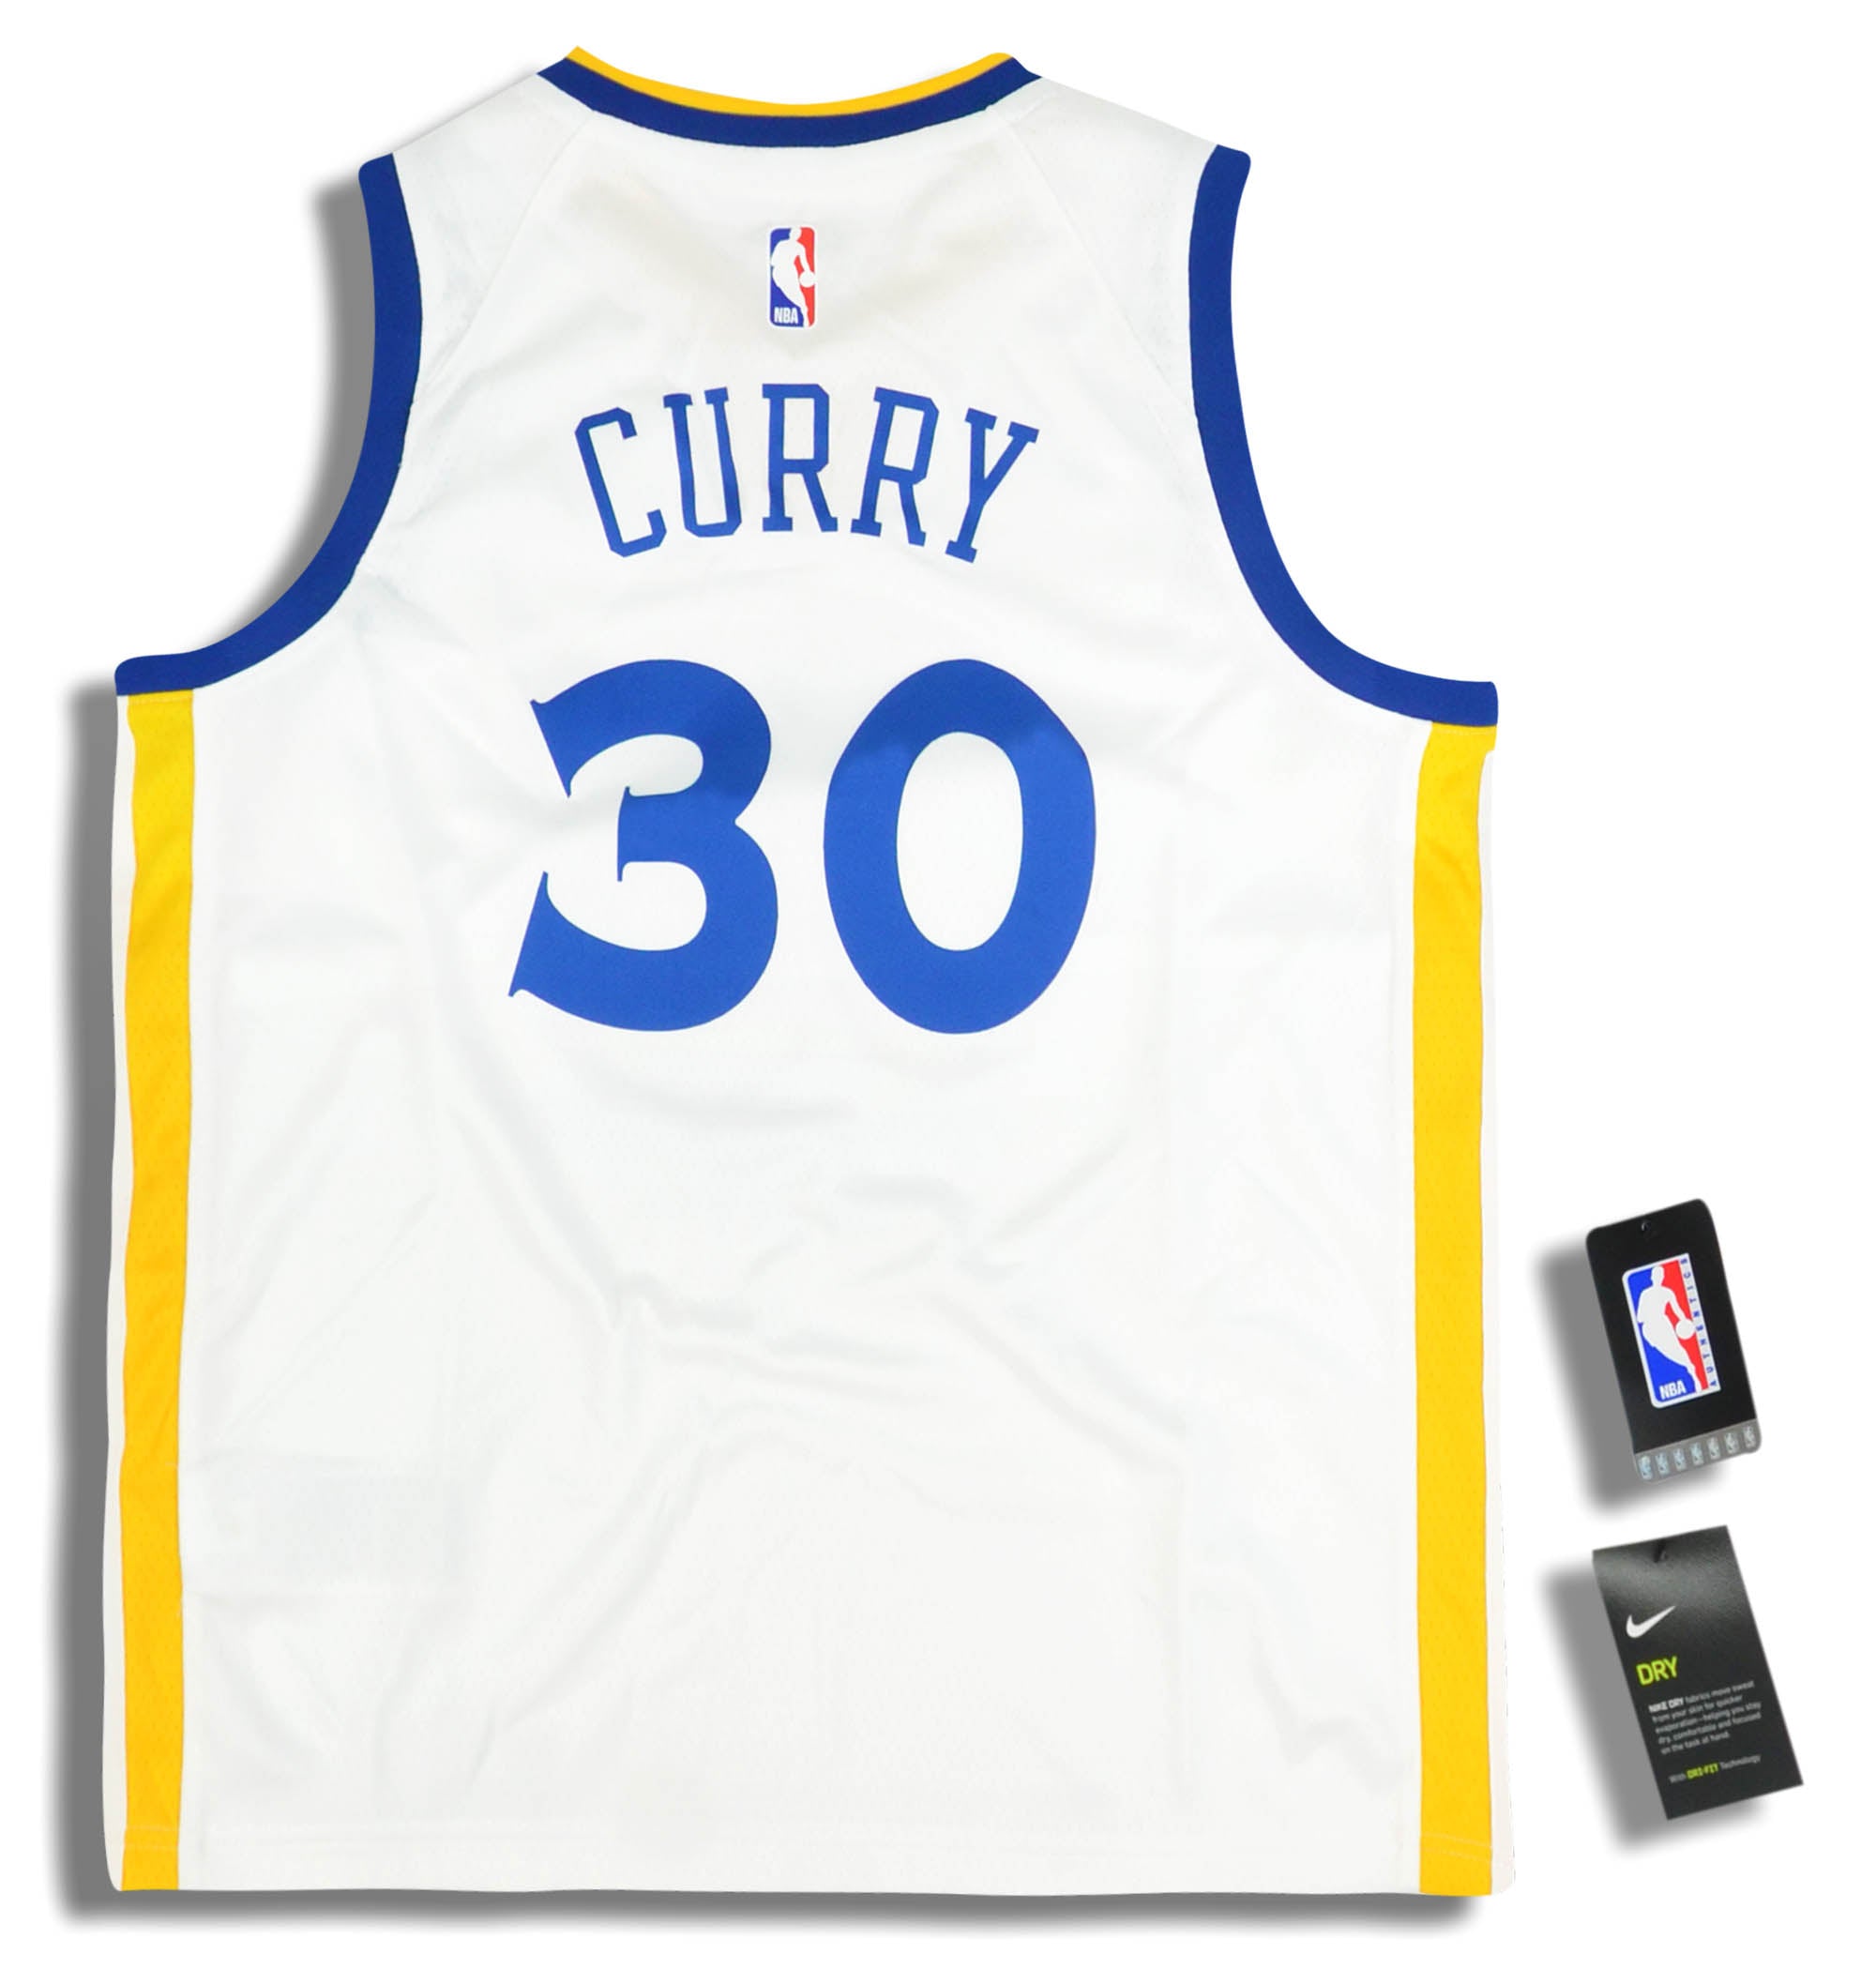 2017-21 GOLDEN STATE WARRIORS CURRY #30 NIKE SWINGMAN JERSEY (HOME) L -  Classic American Sports